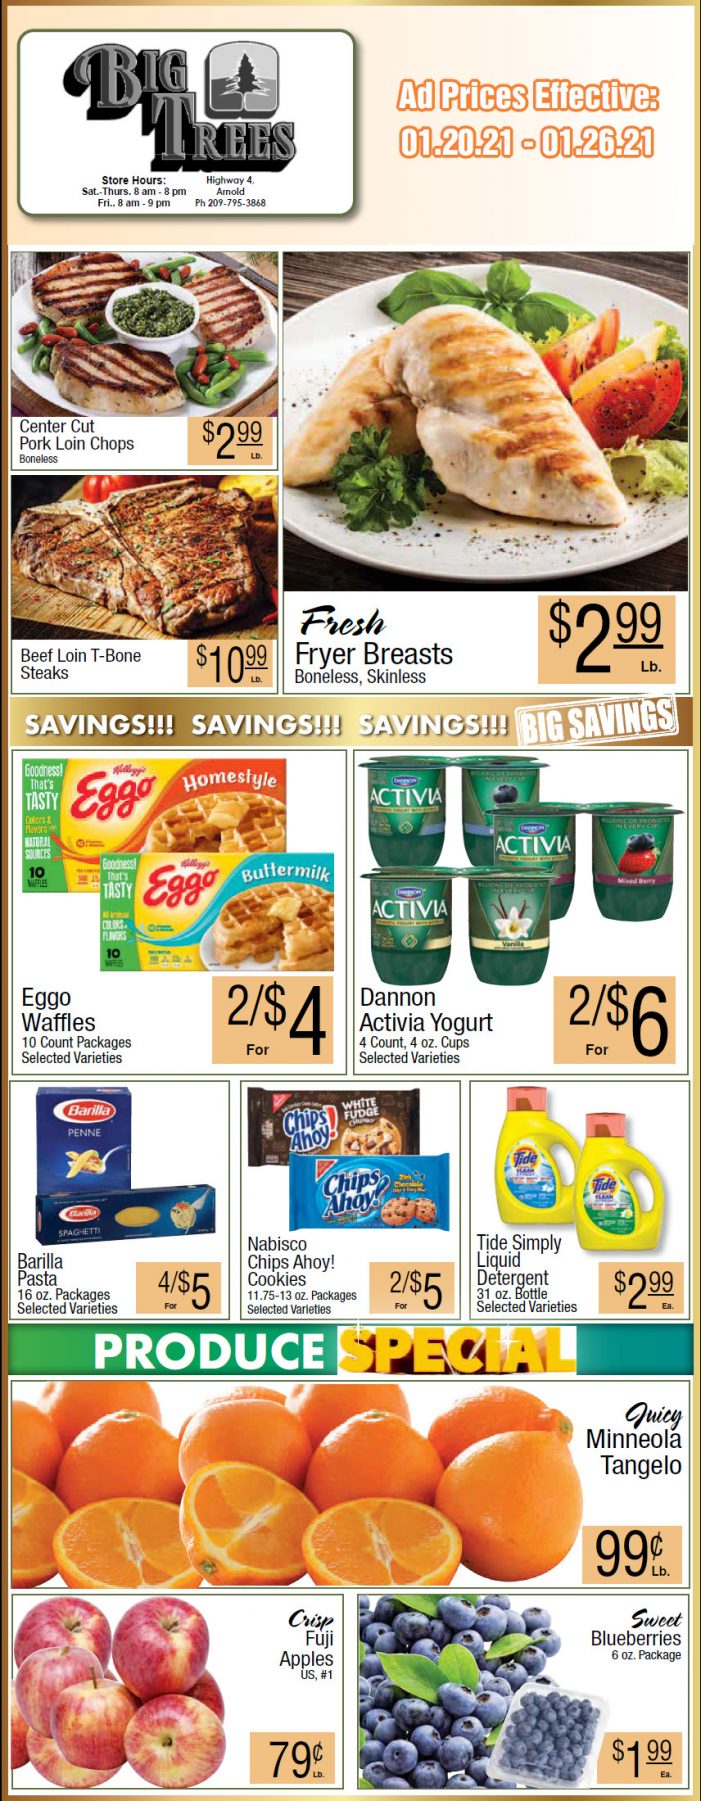 Big Trees Market Weekly Ad & Grocery Specials Through January 26th